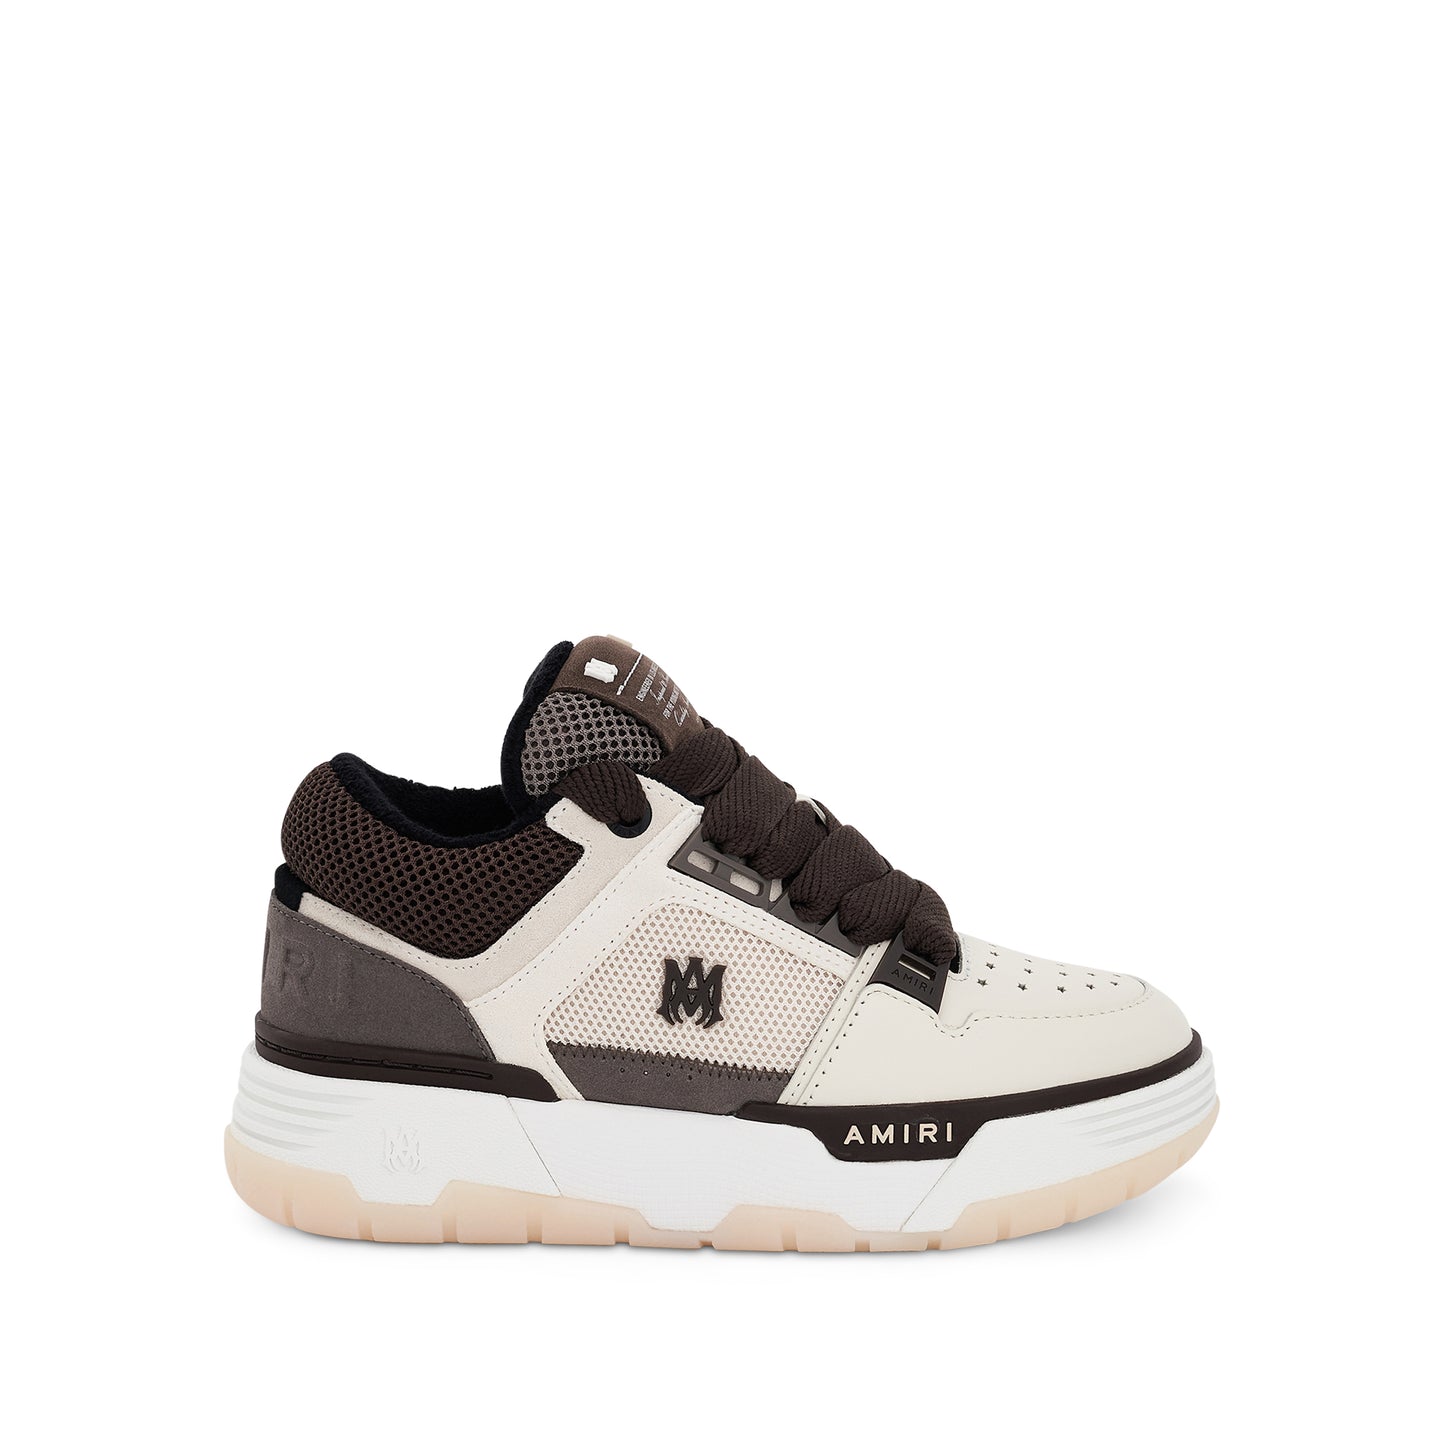 MA-1 Sneakers in Brown/White